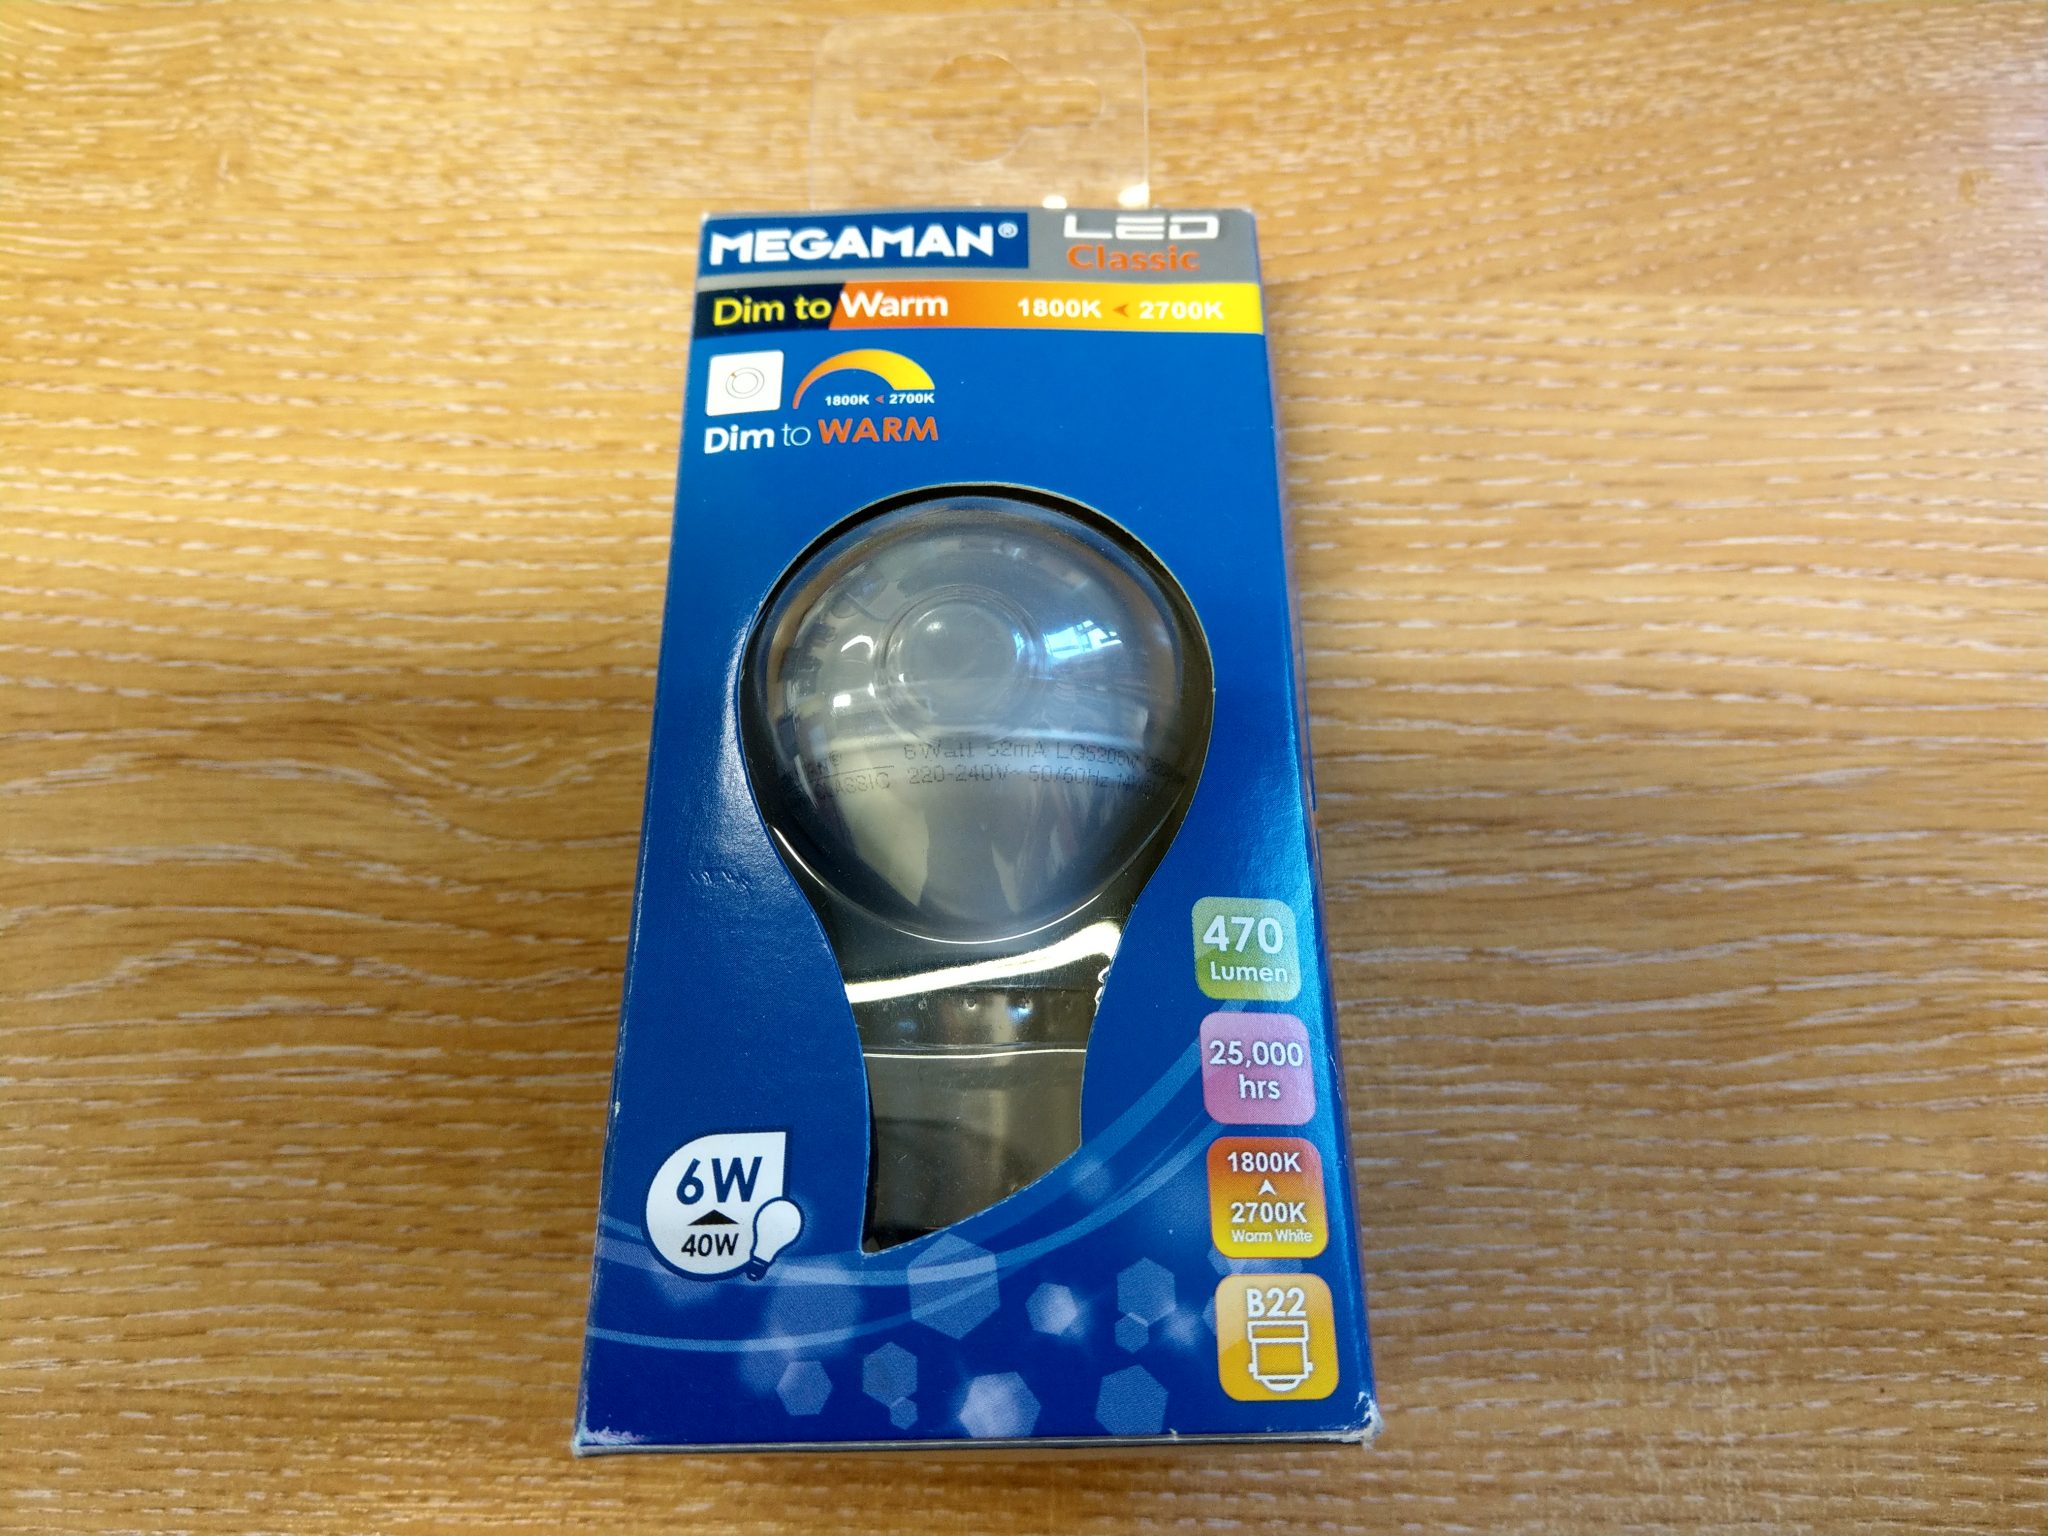 LED bulb in shop packaging